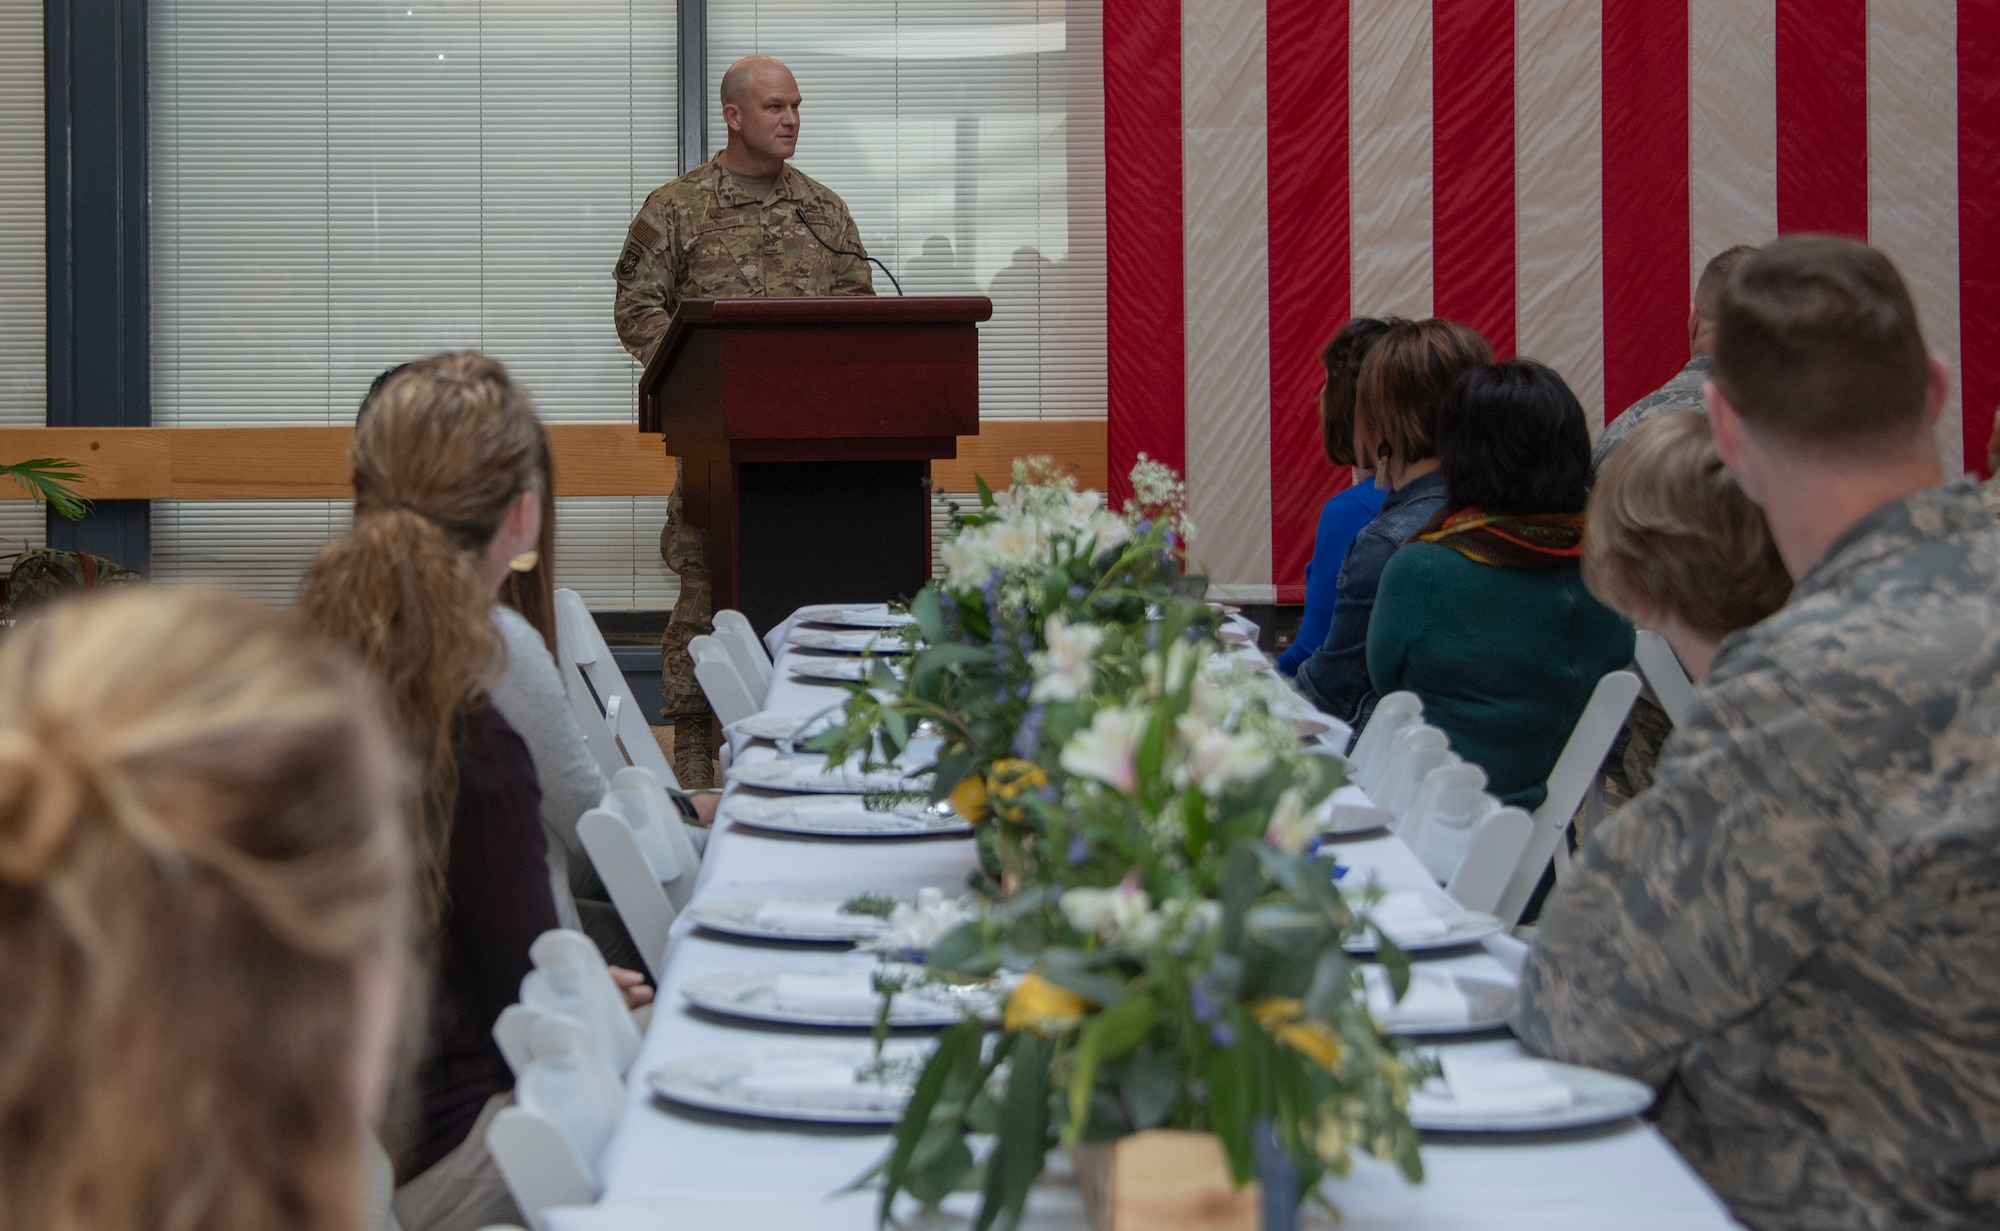 U.S. Air Force Col. David Hammerschmidt, 60th Aircraft Maintenance Group commander, delivers the opening remarks during the Key Spouse Recognition event at the 60th MXG atrium, Feb. 8, 2019 at Travis Air Force Base, California. The Key Spouse Program is an Air Force-wide volunteer program that builds and fosters support for military families through outreach education events and providing families a link to leadership.(U.S. Air Force photo by Heide Couch)